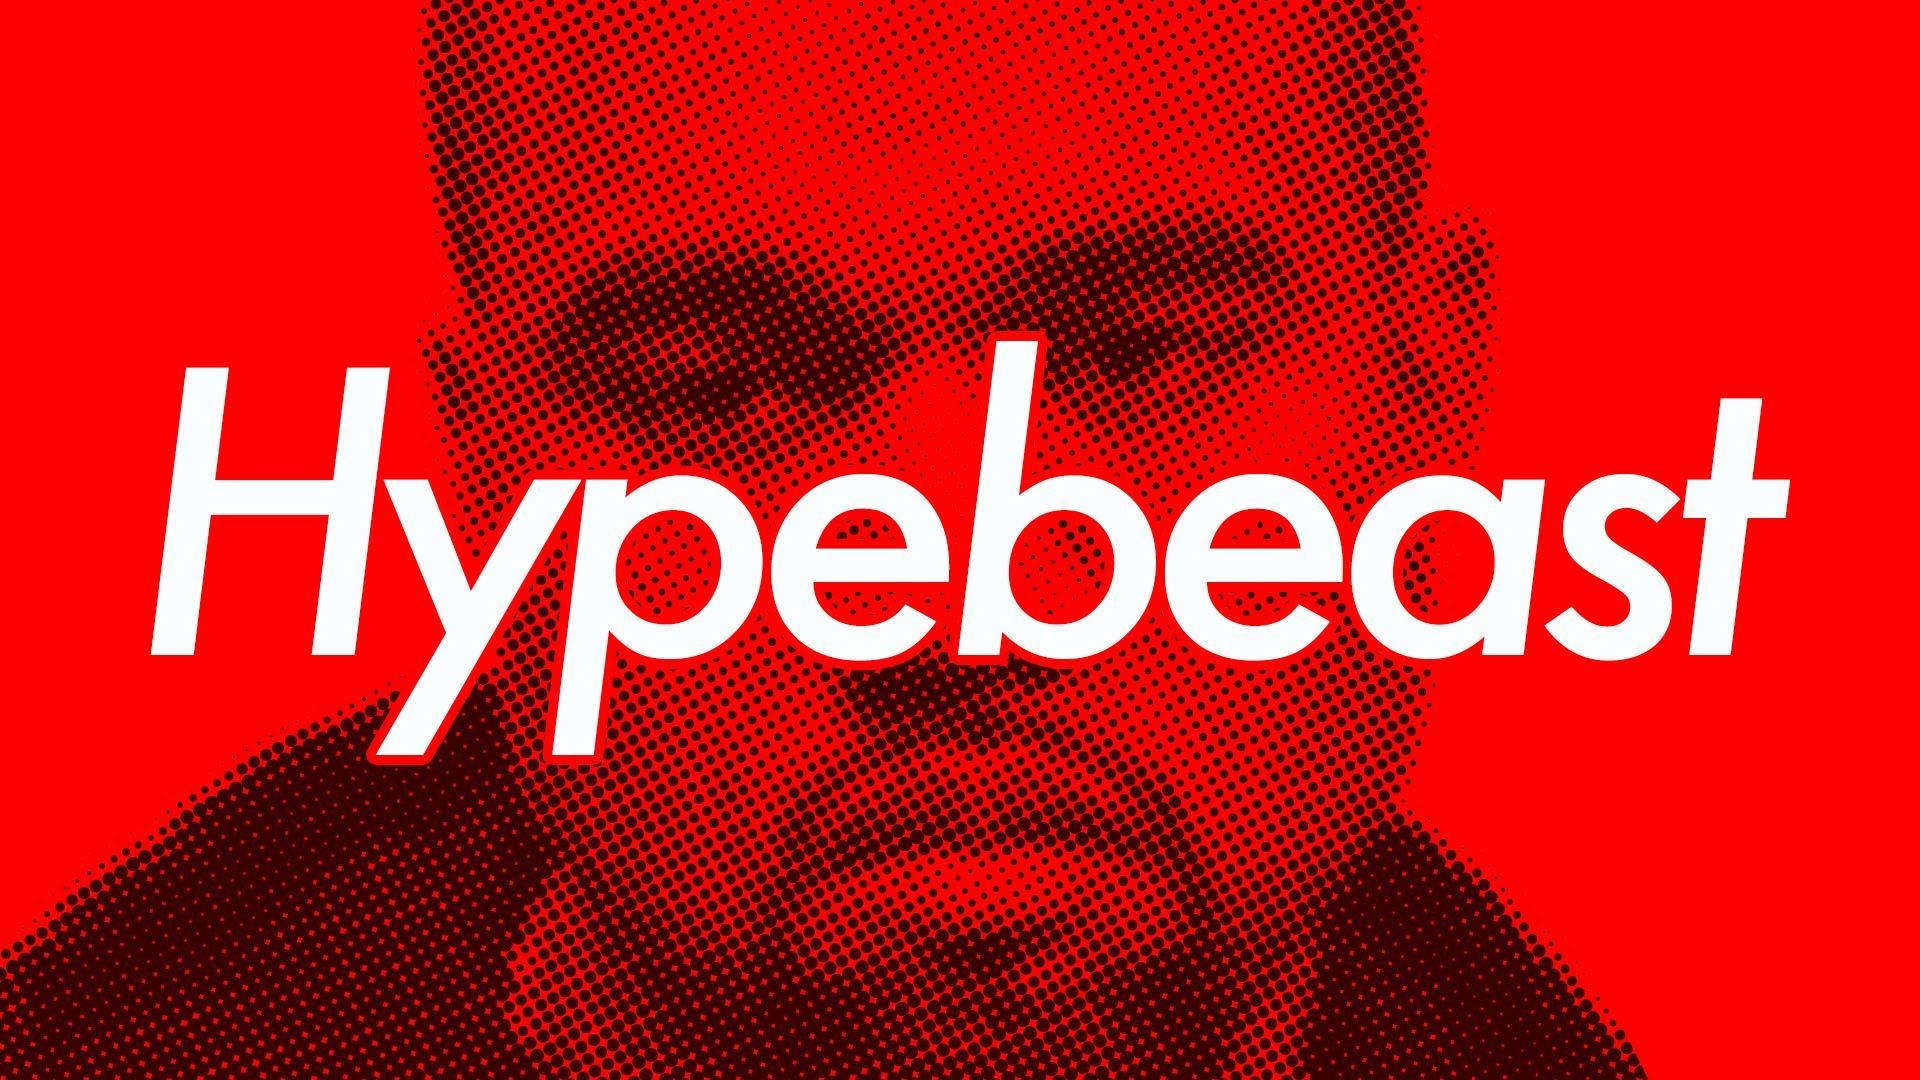 "The king of hypebeast, Kanye West." Wallpaper